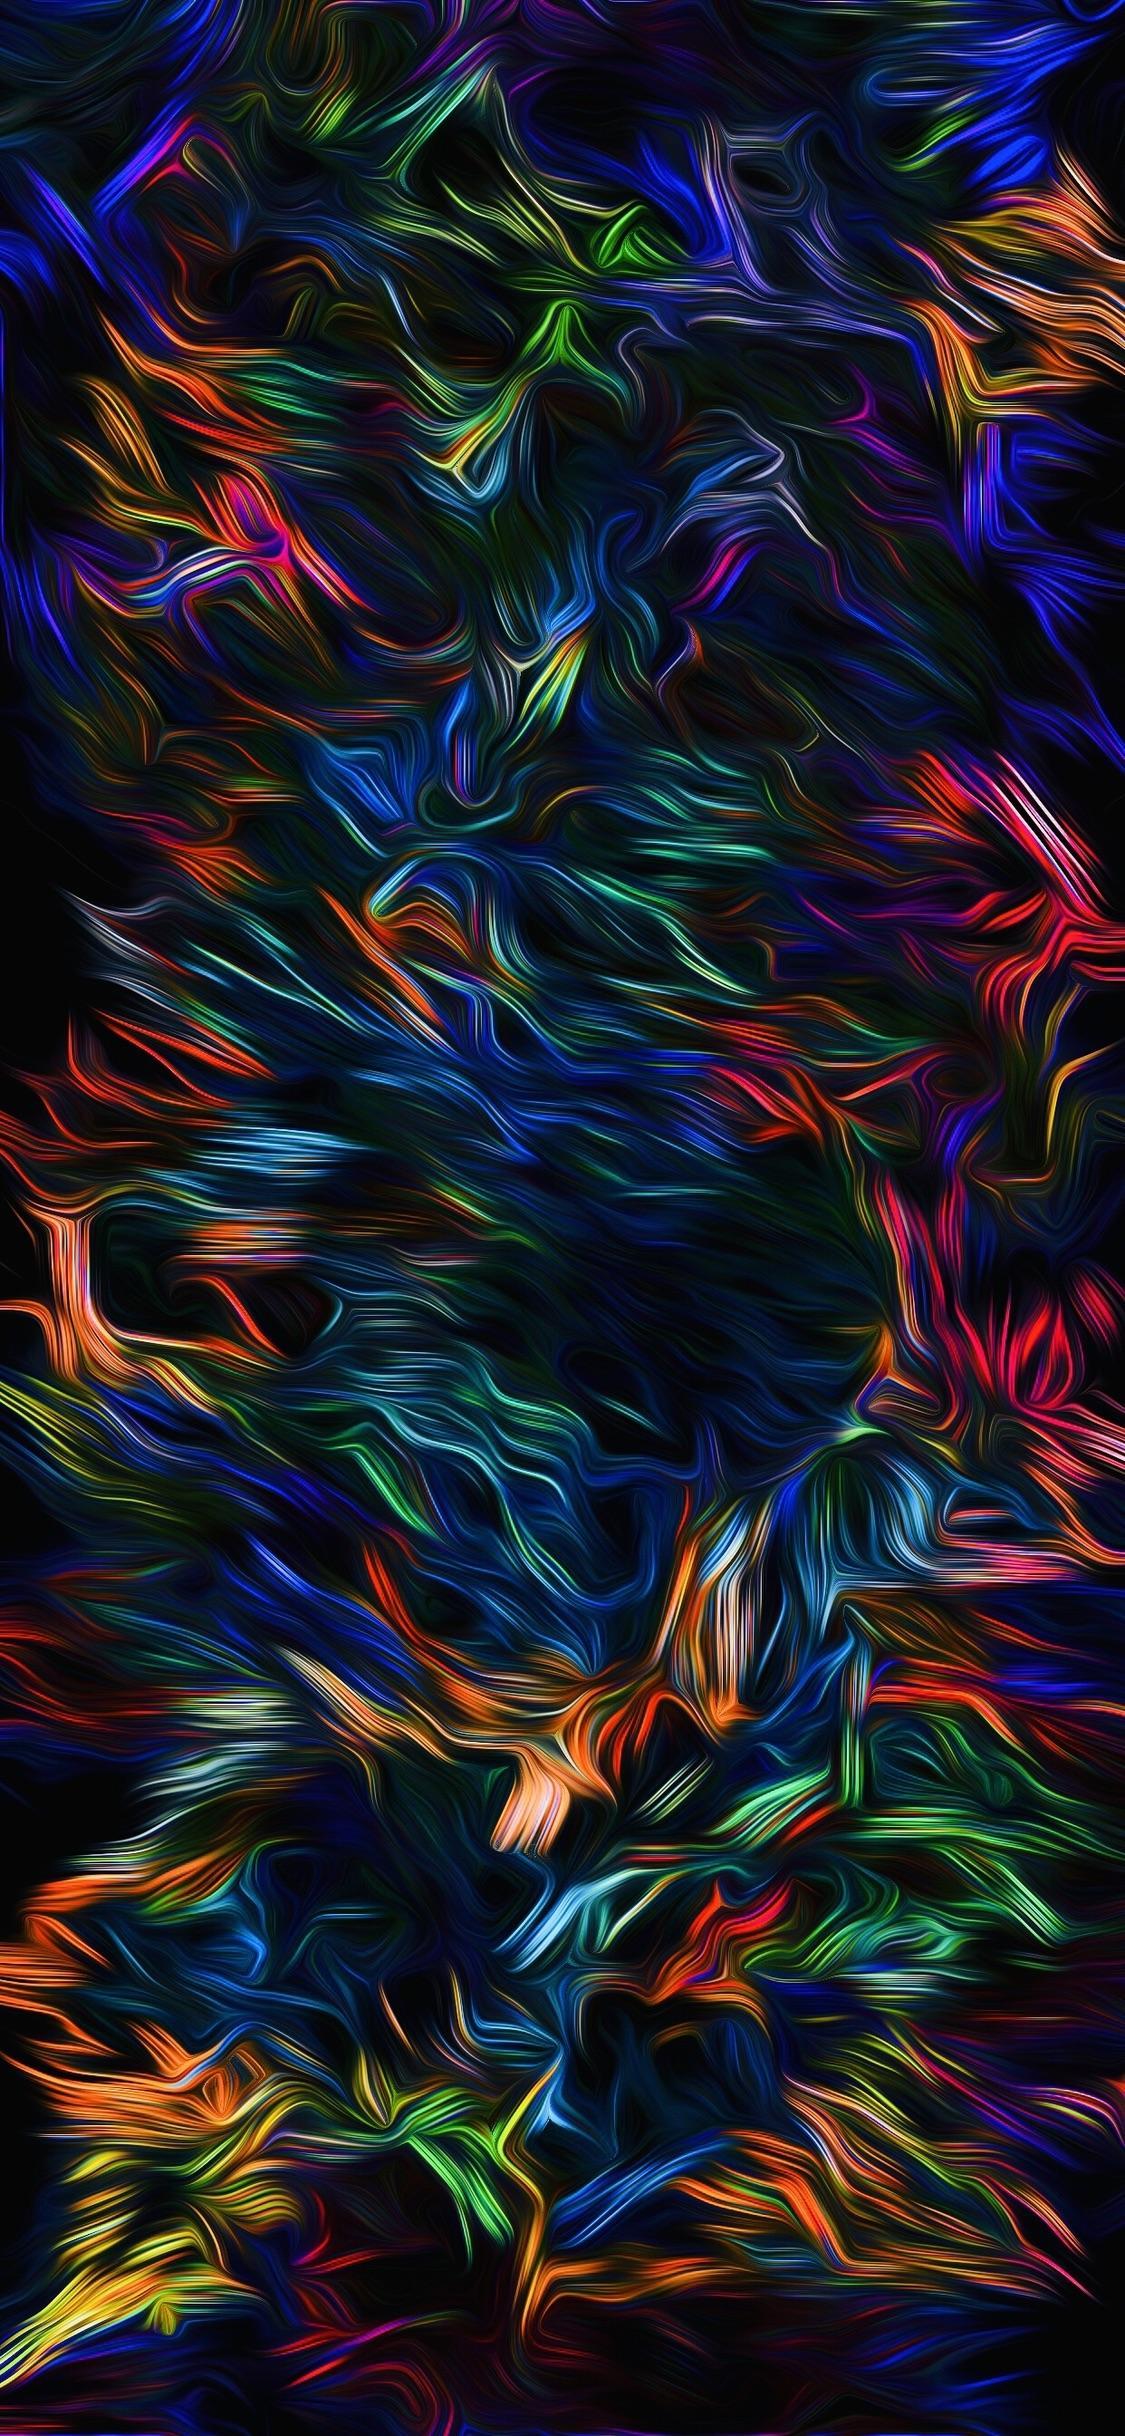 Abstract iPhone X Wallpapers - Wallpaper Cave